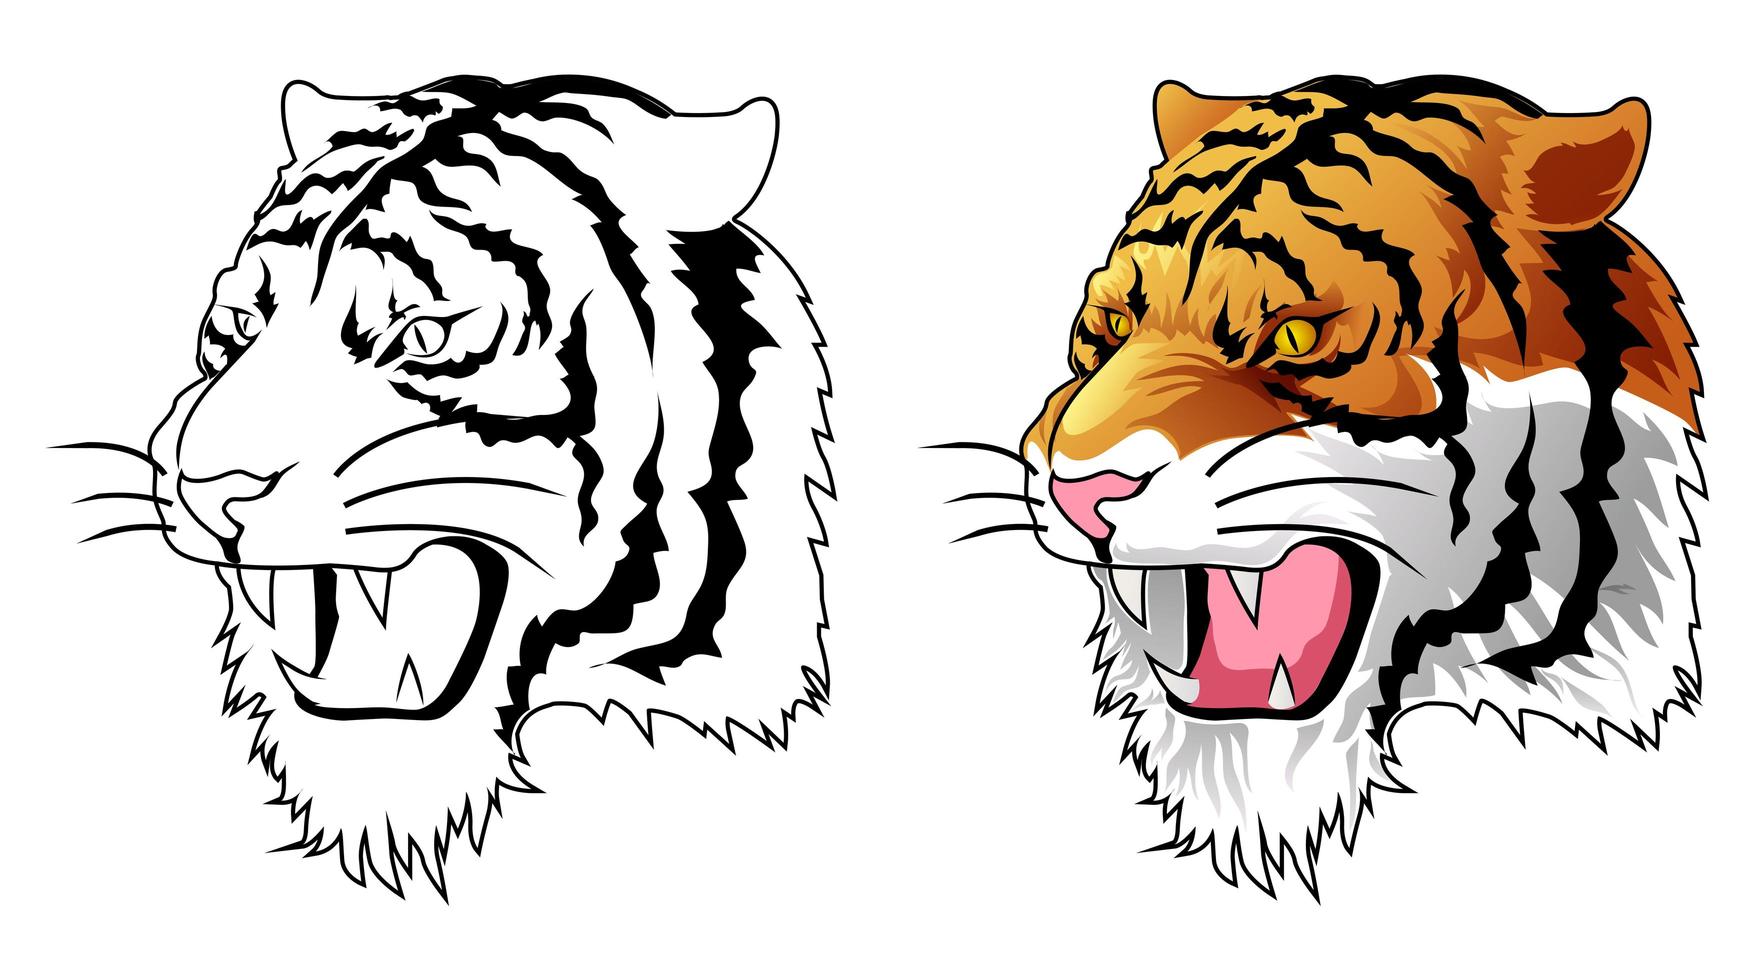 Tiger head cartoon coloring page for kids vector